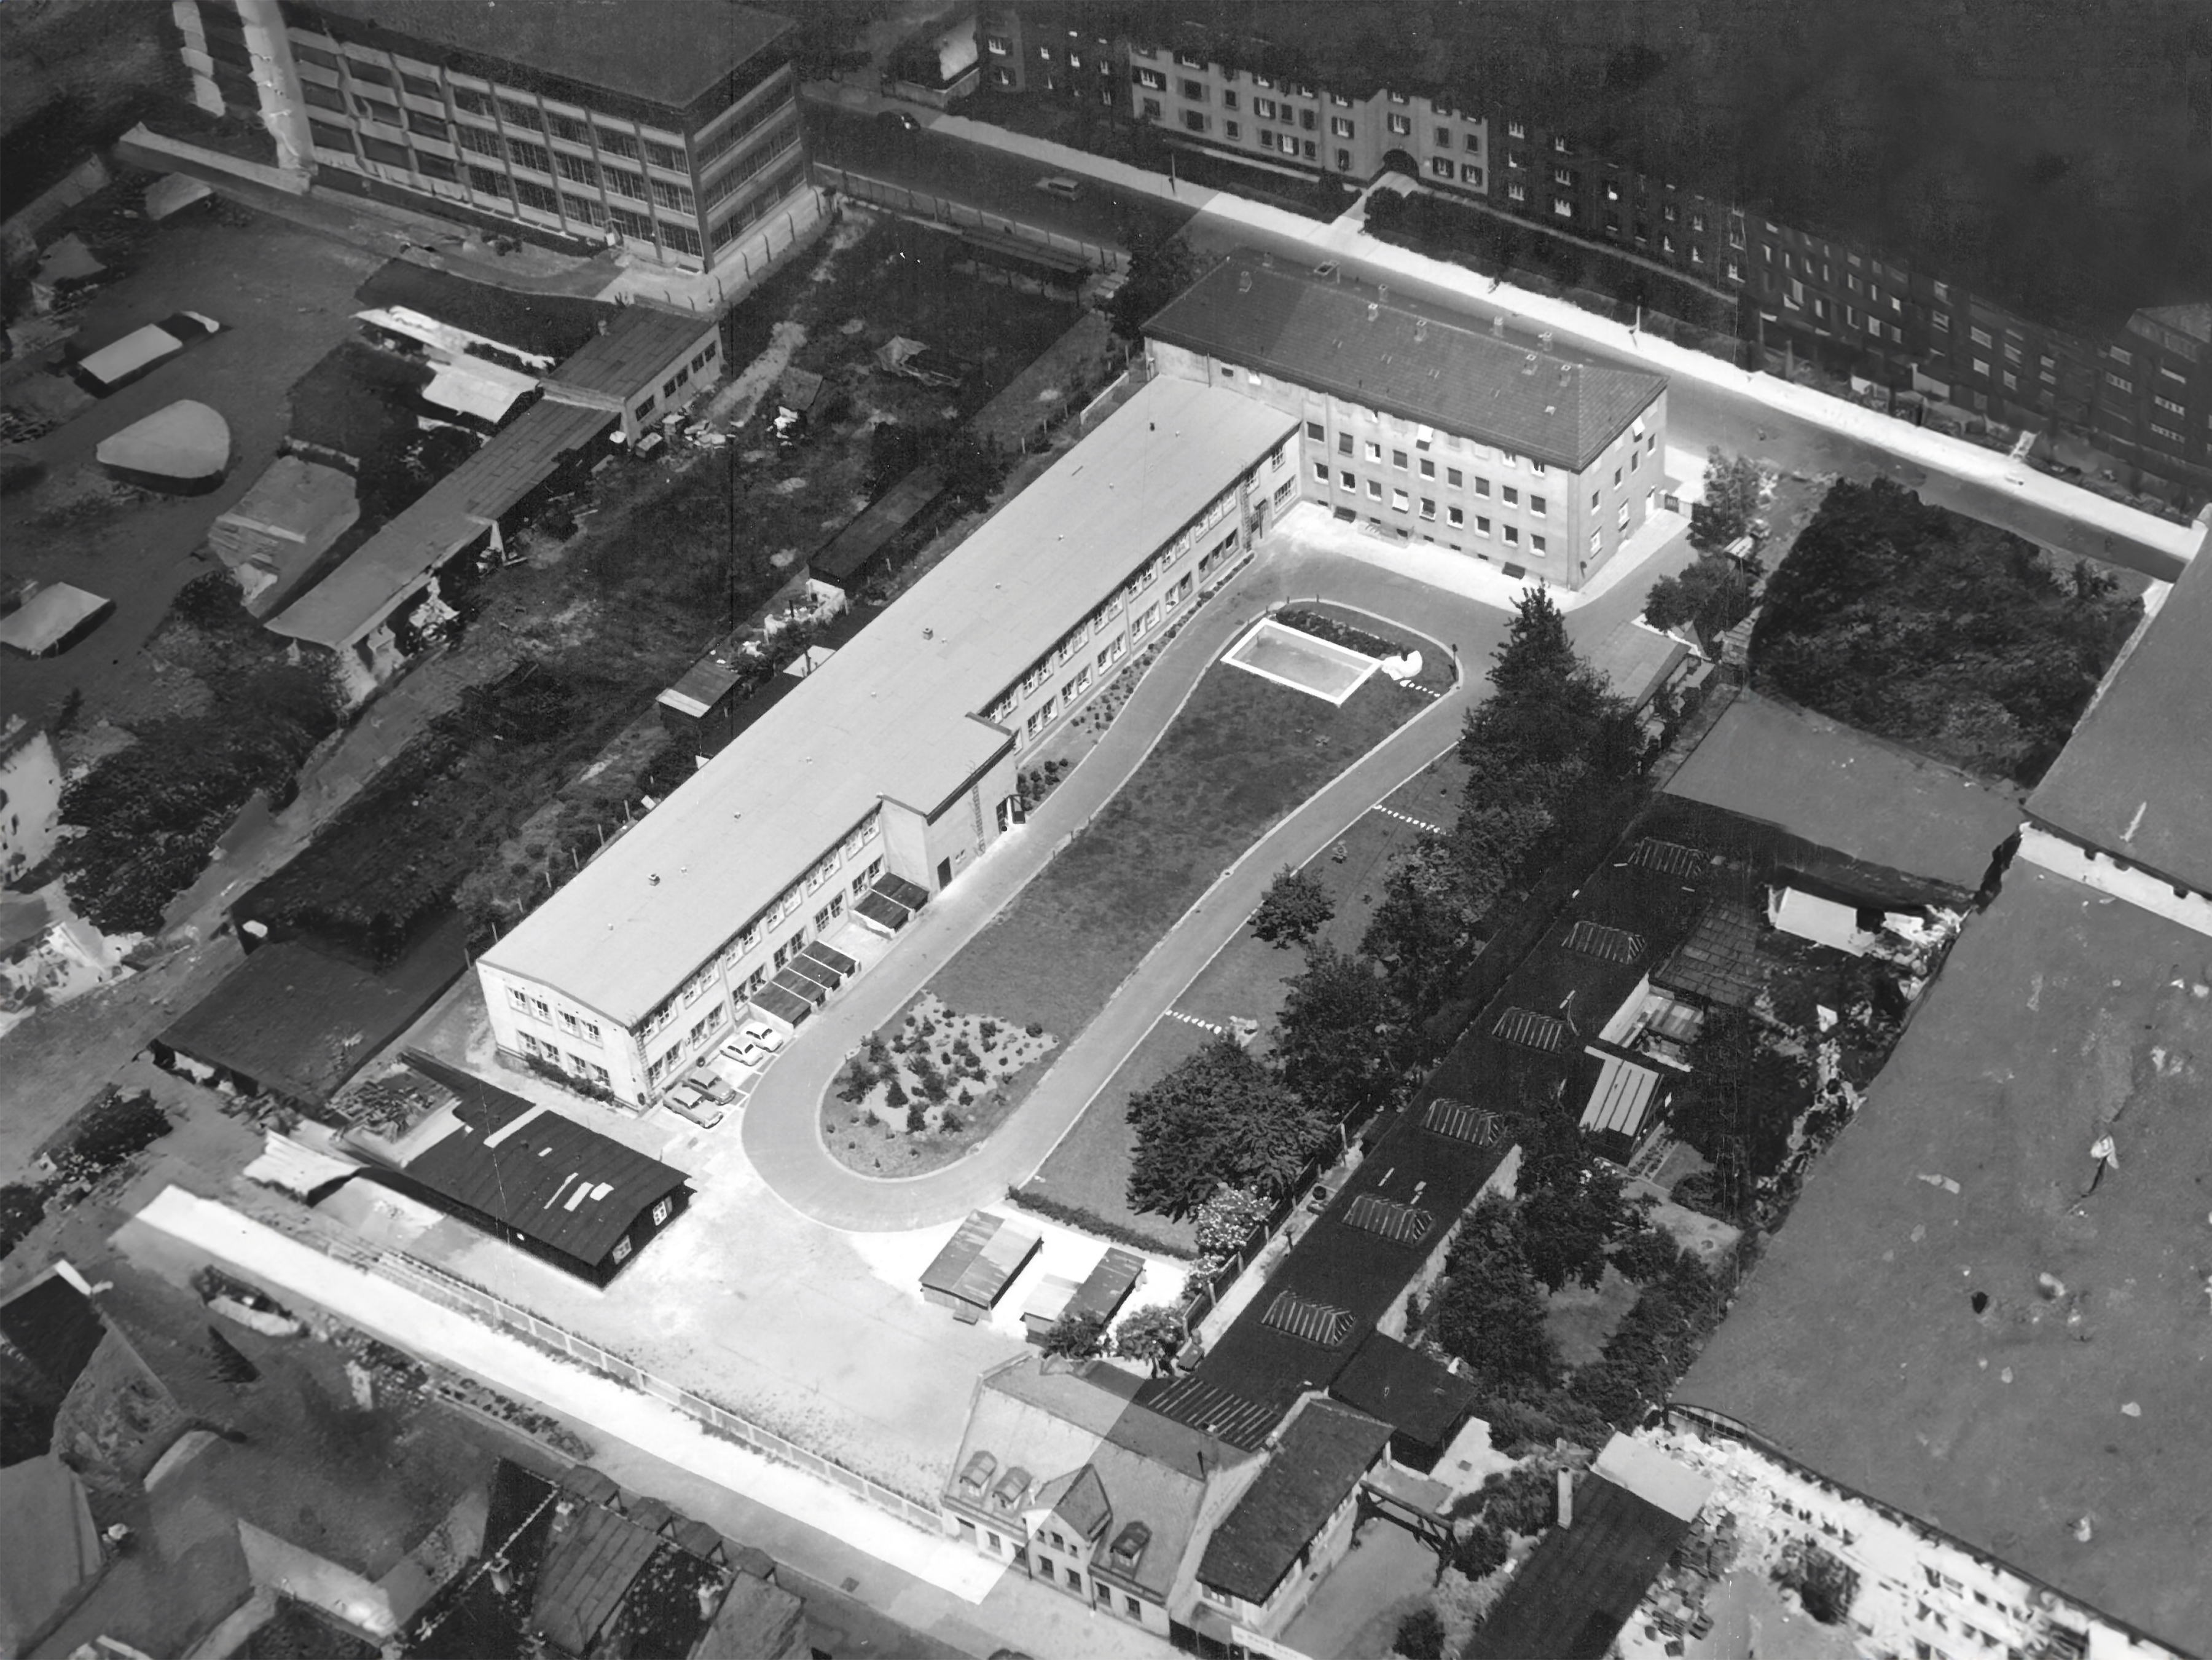 The image shows an old aerial photo of the company building of Noris Group GmbH